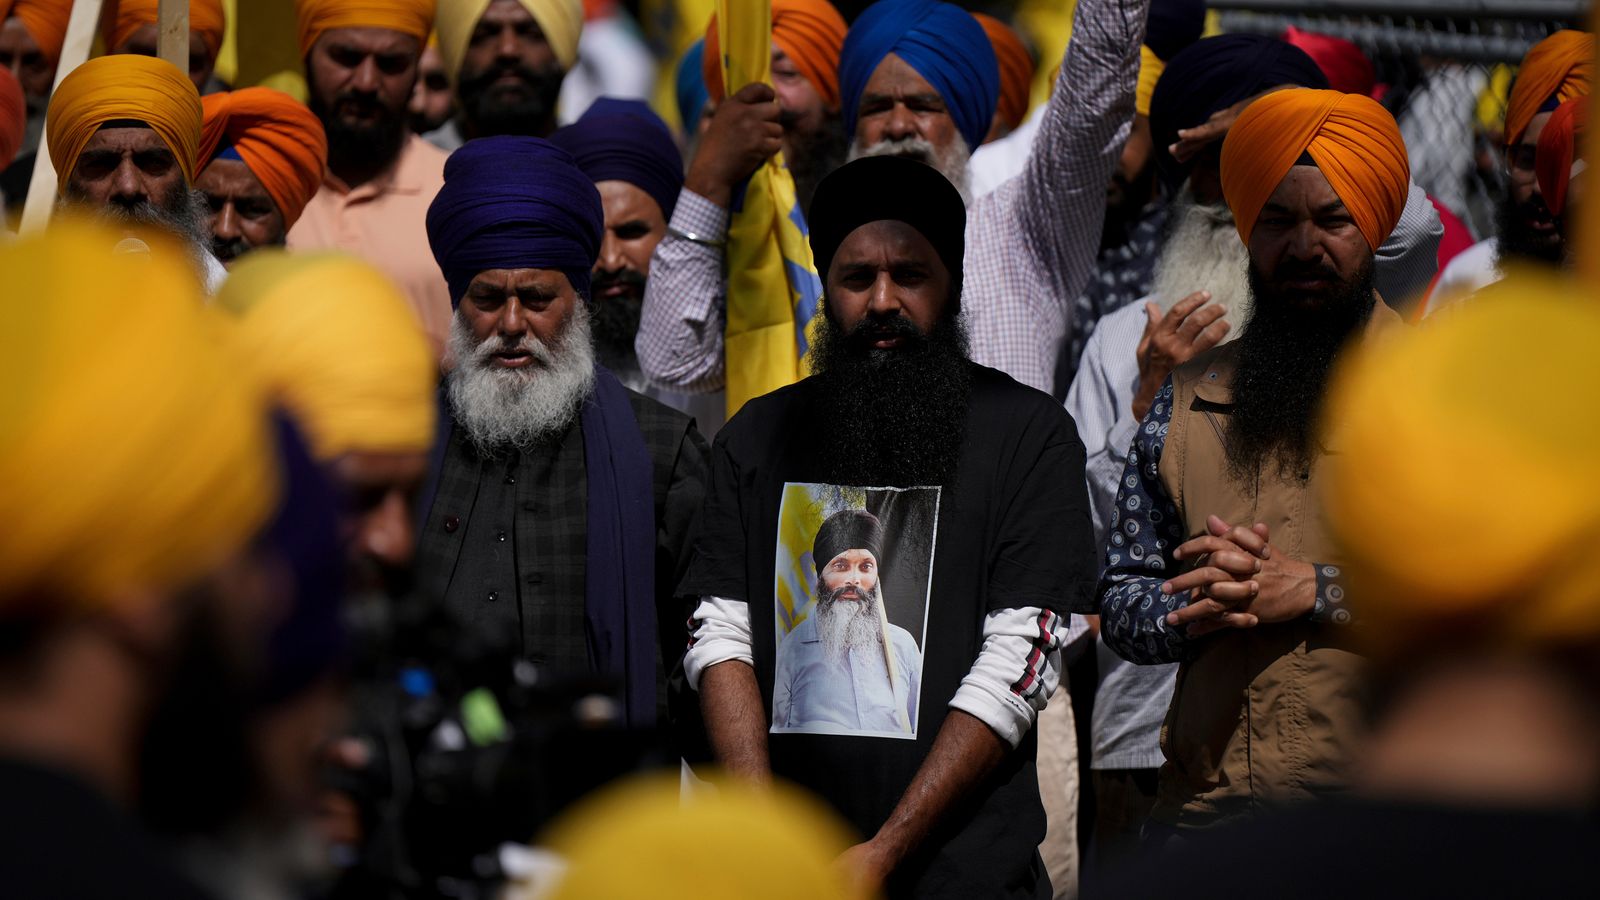 Canada claims Indian government assassinated Sikh leader